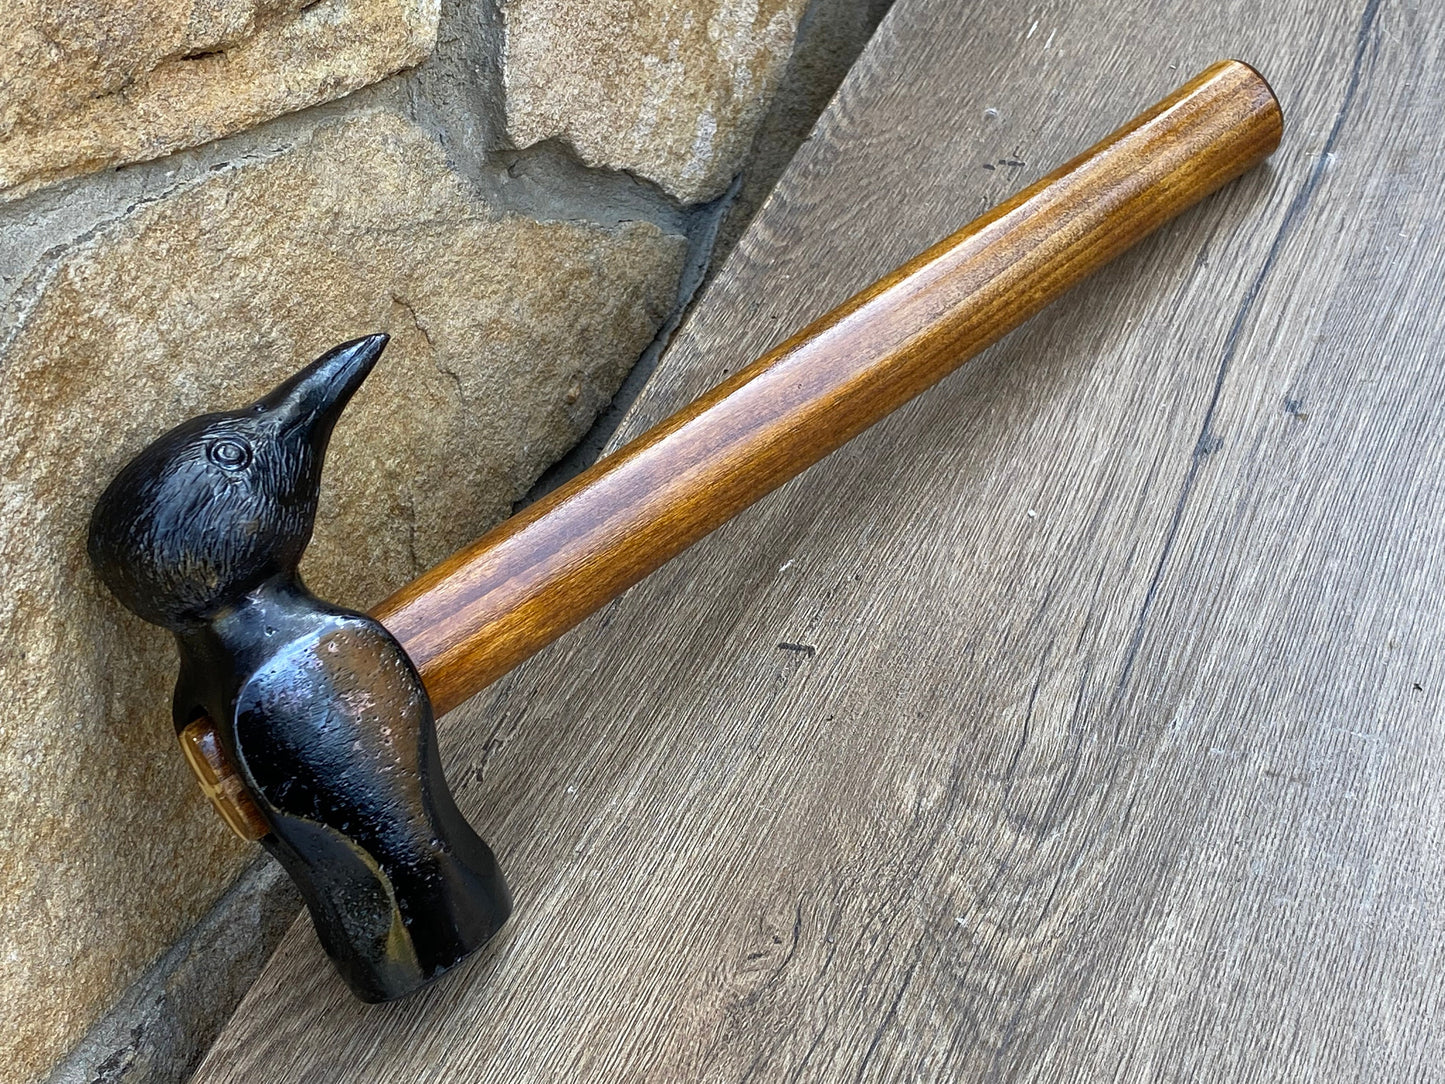 Hammer, raven, crow, gift for dad, Fathers Day, hand crafted hammer, dad, birthday, Christmas, anniversary, gift for men, tools, bird decor